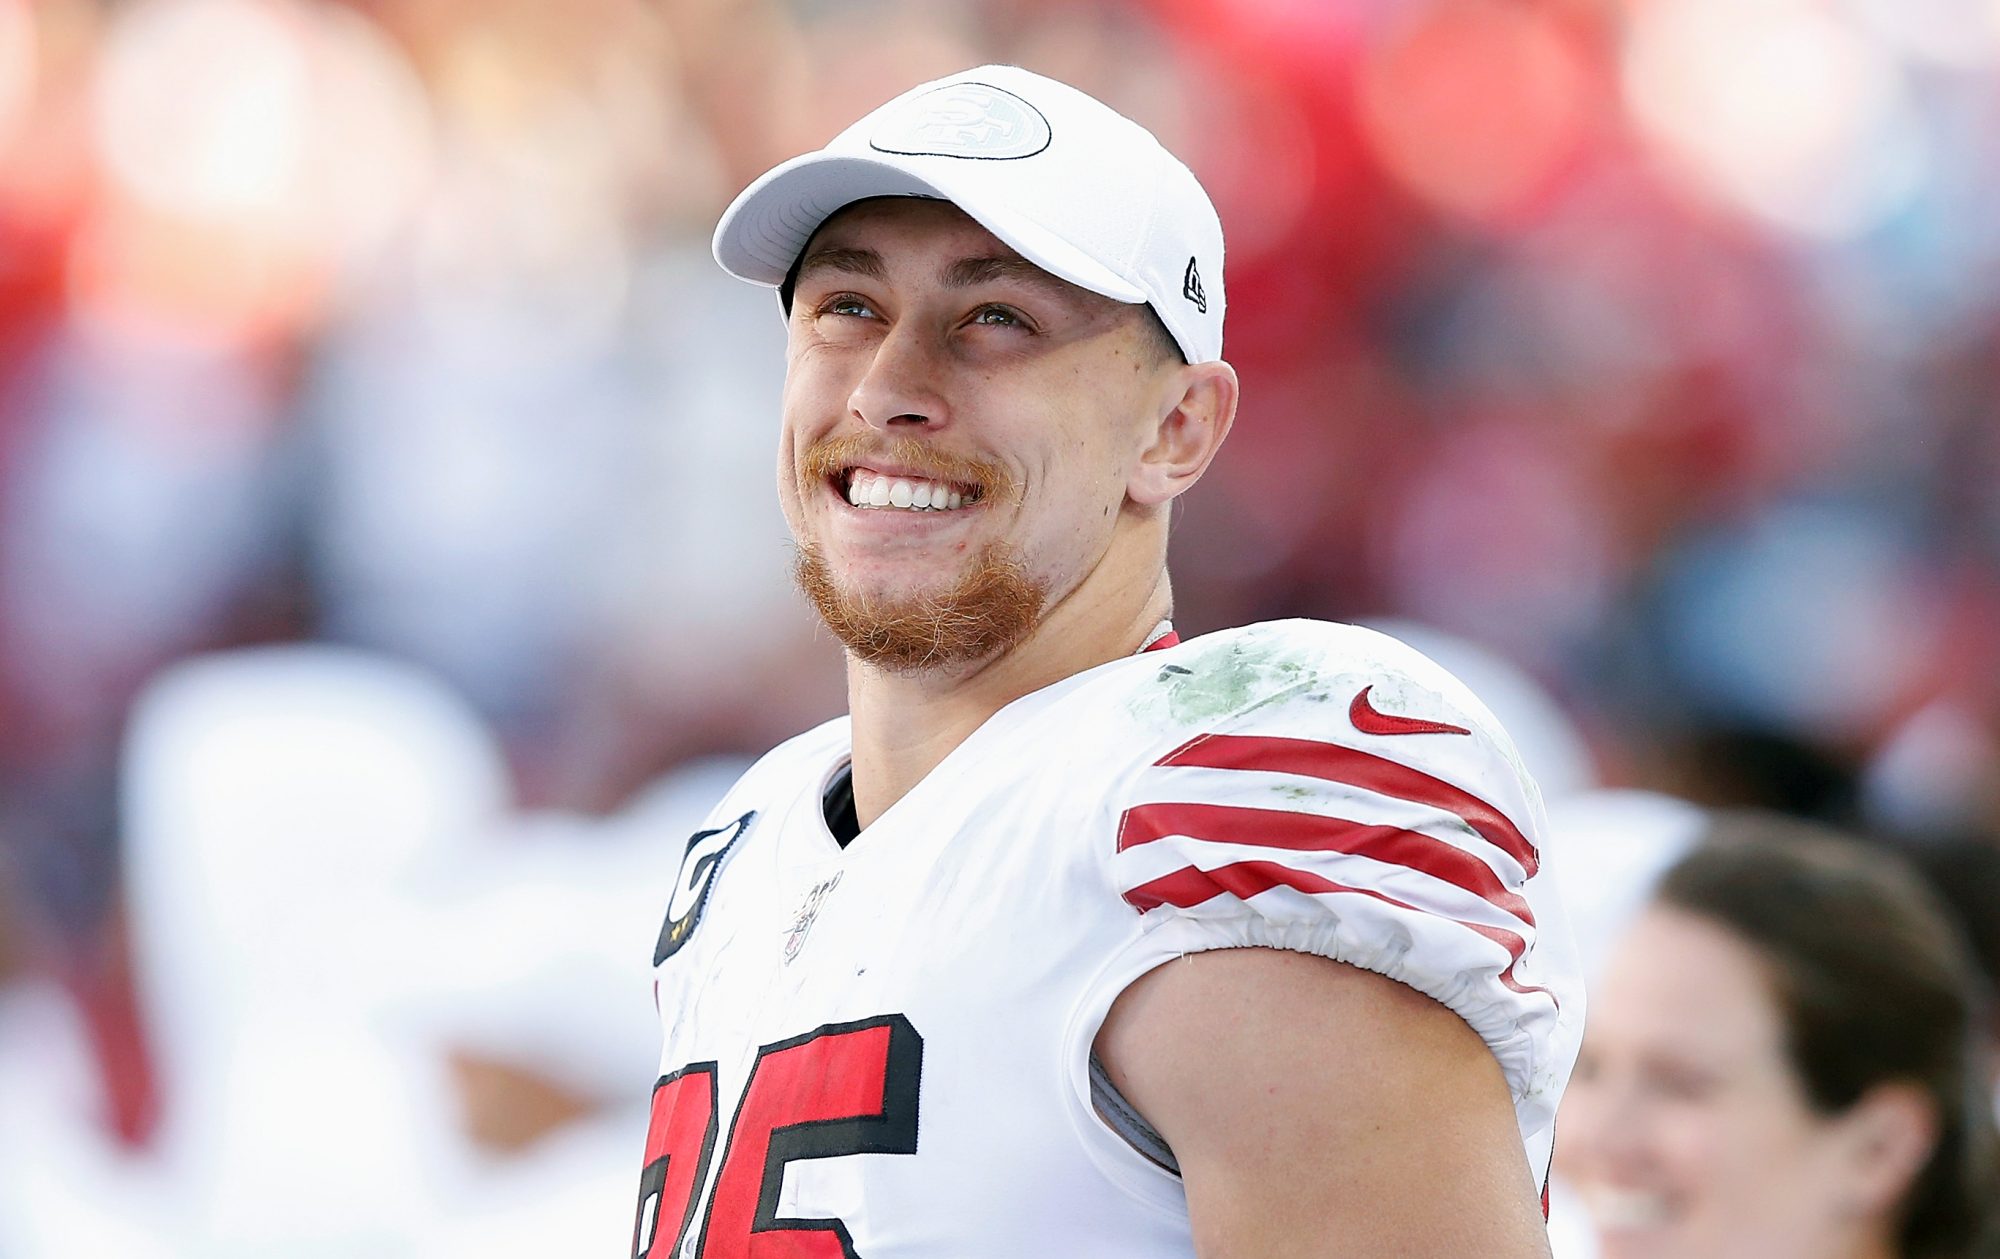 NFL Star George Kittle Built Himself a Backyard Golf Course After Watching the 2021 Masters